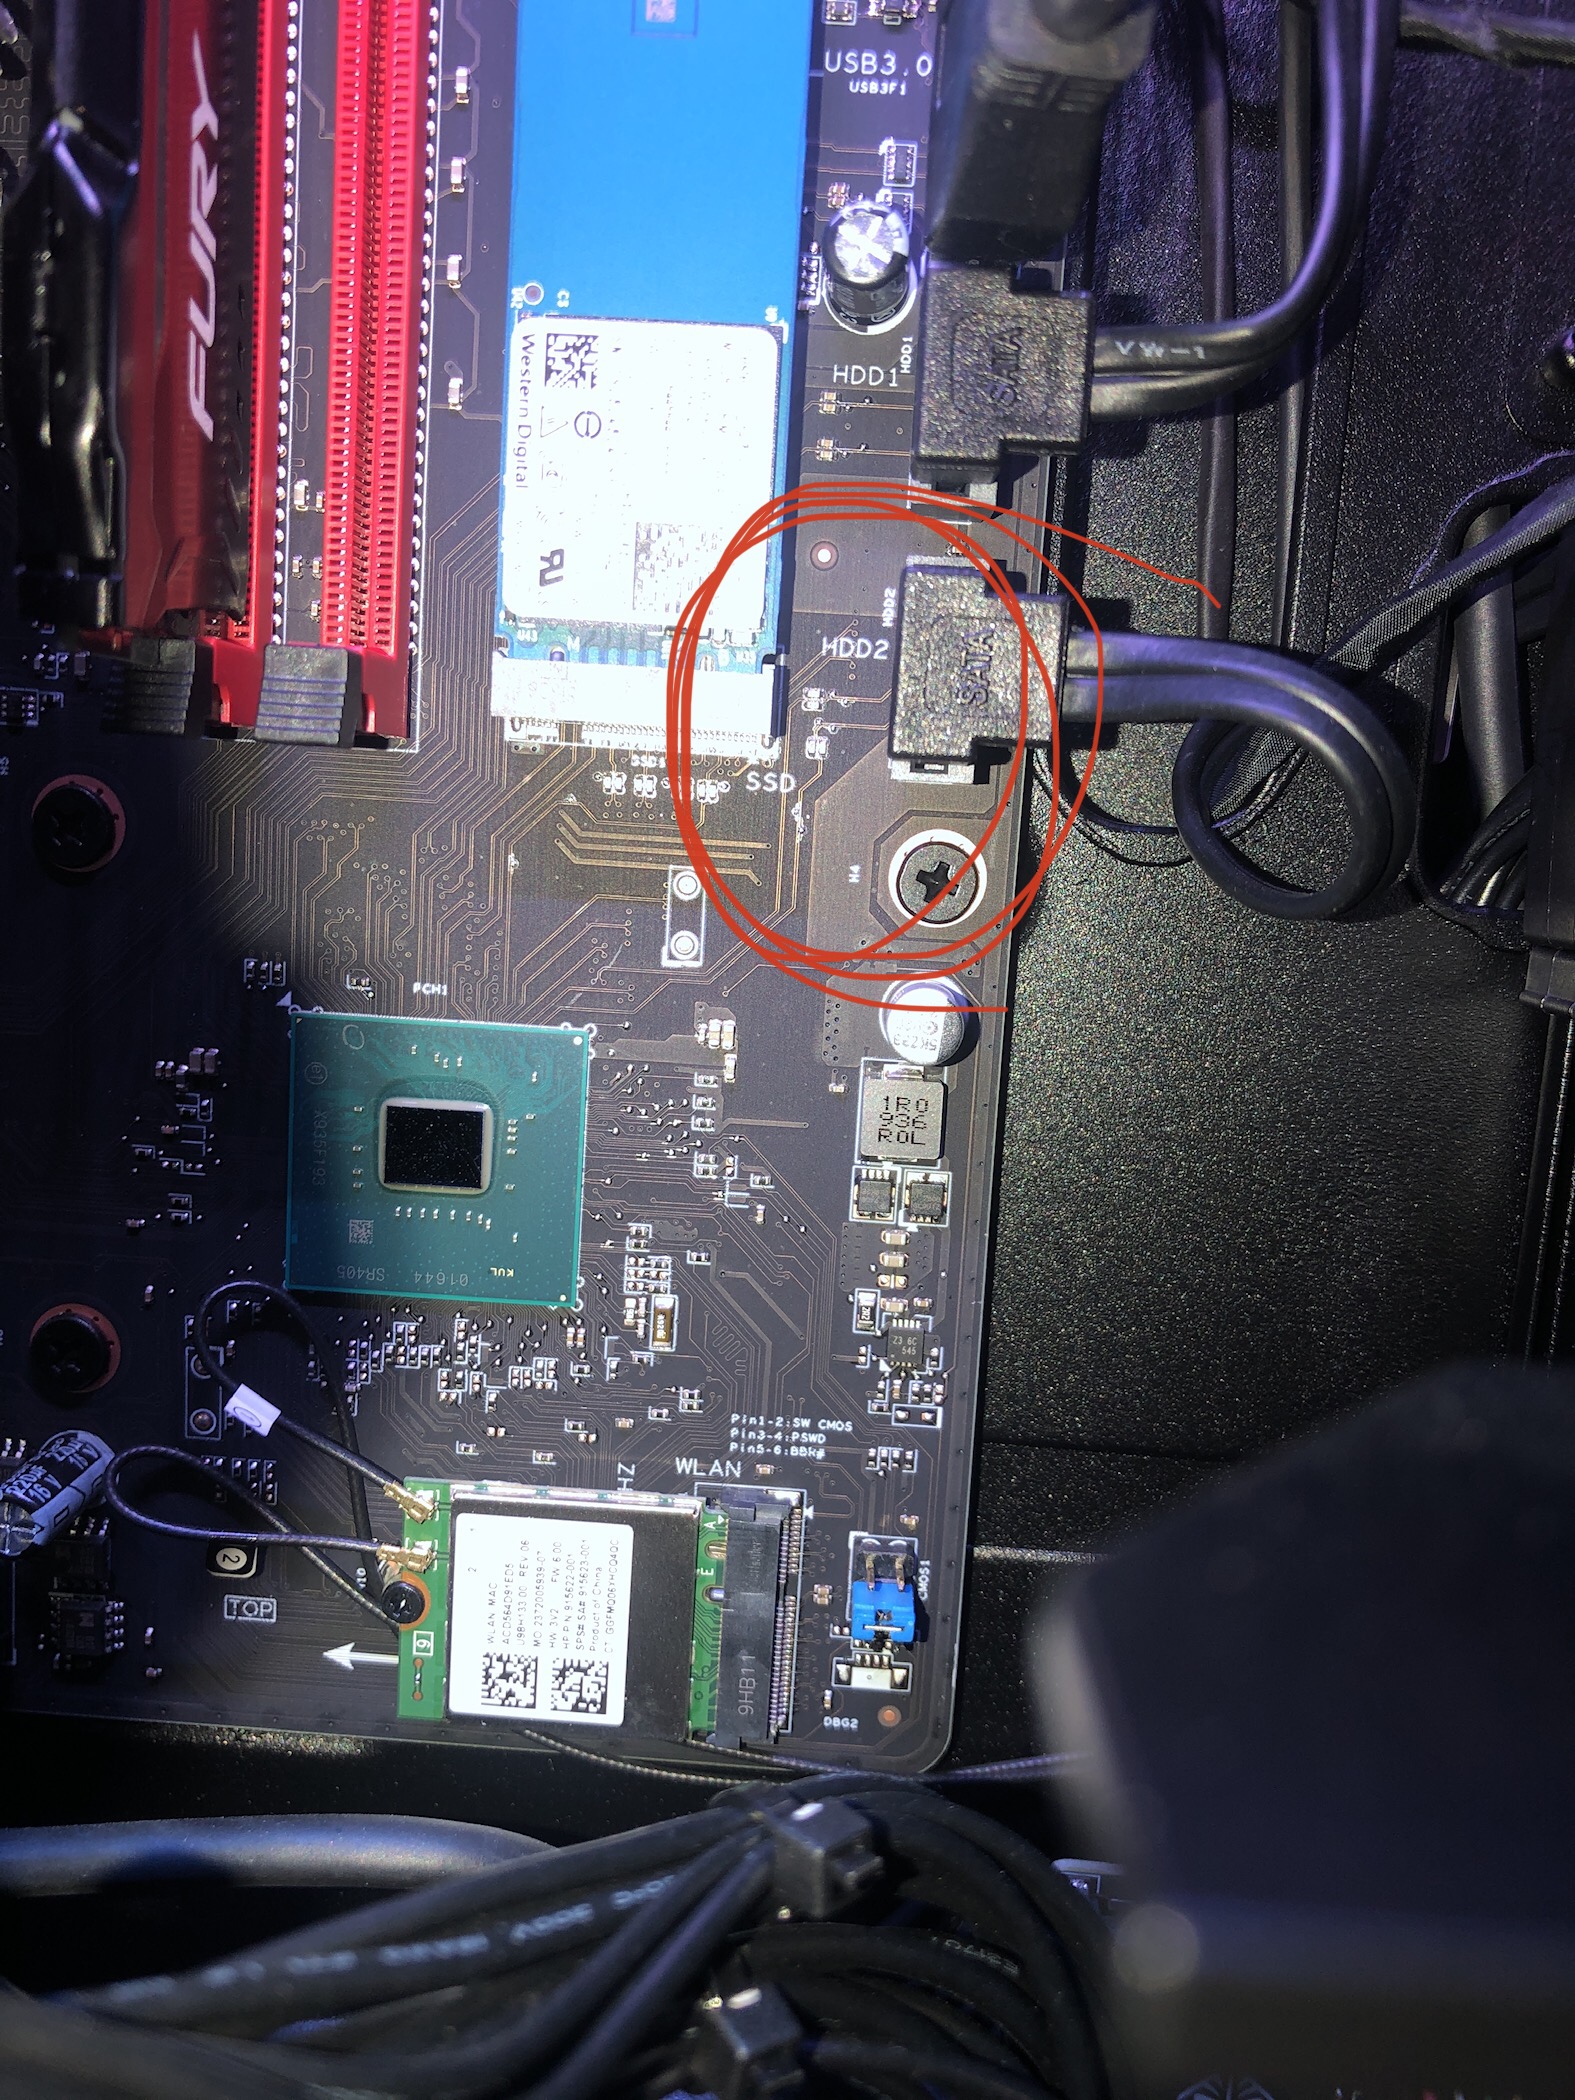 Omen Obelisk: Will the SATA 3 port labled HDD2 recognize a 1... - HP  Support Community - 7594384